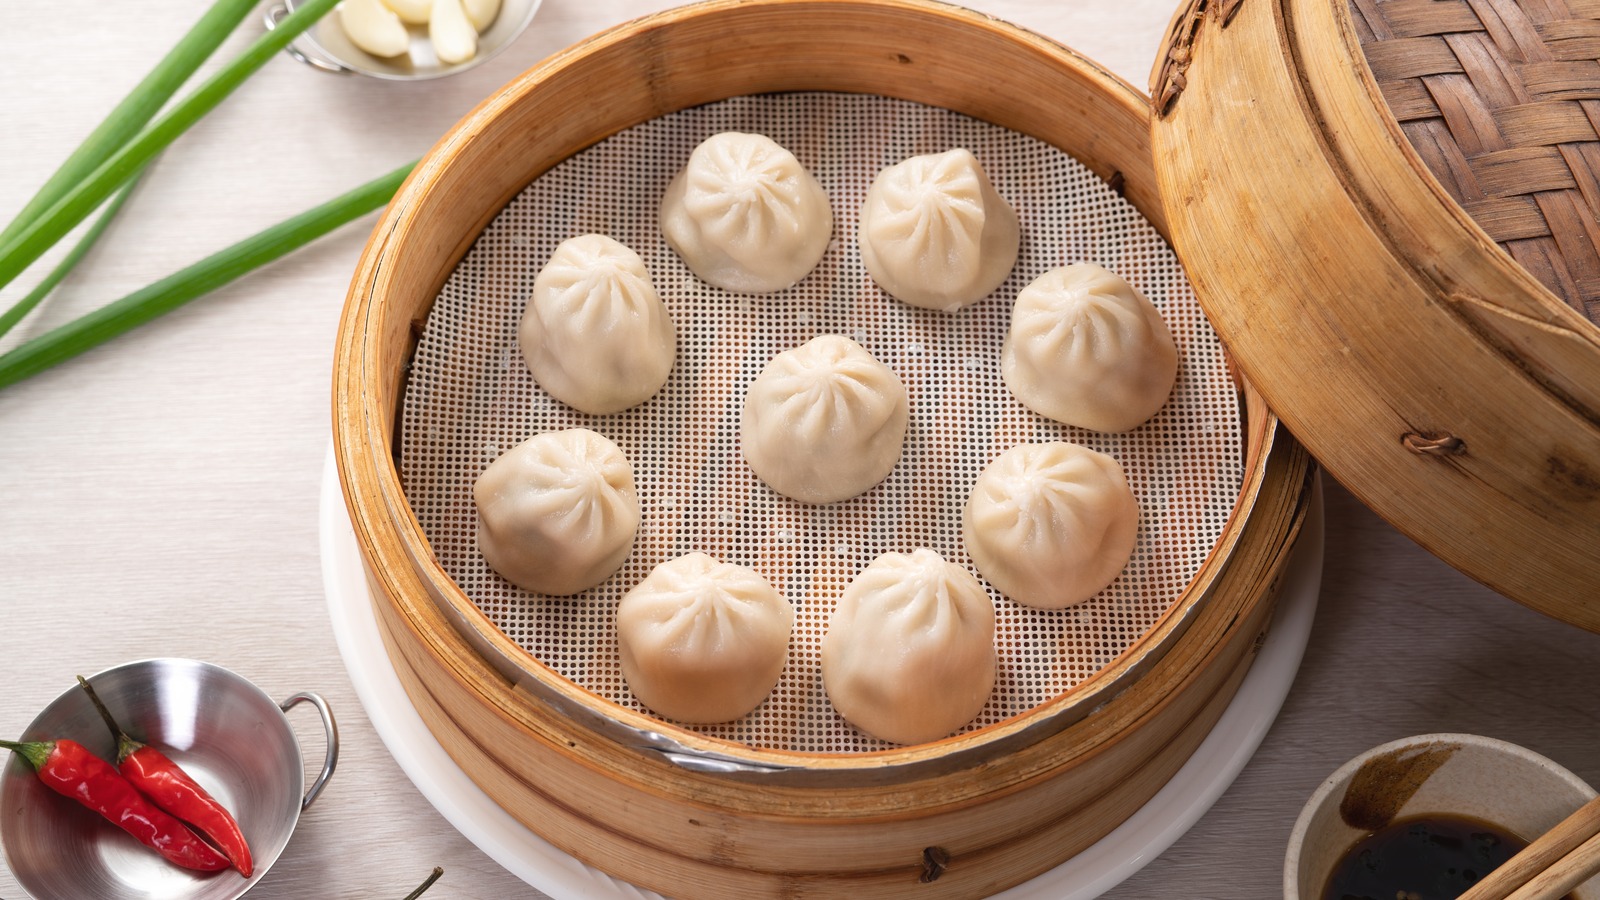 Move Aside Trader Joe's, There's a New Soup Dumpling Taking Over